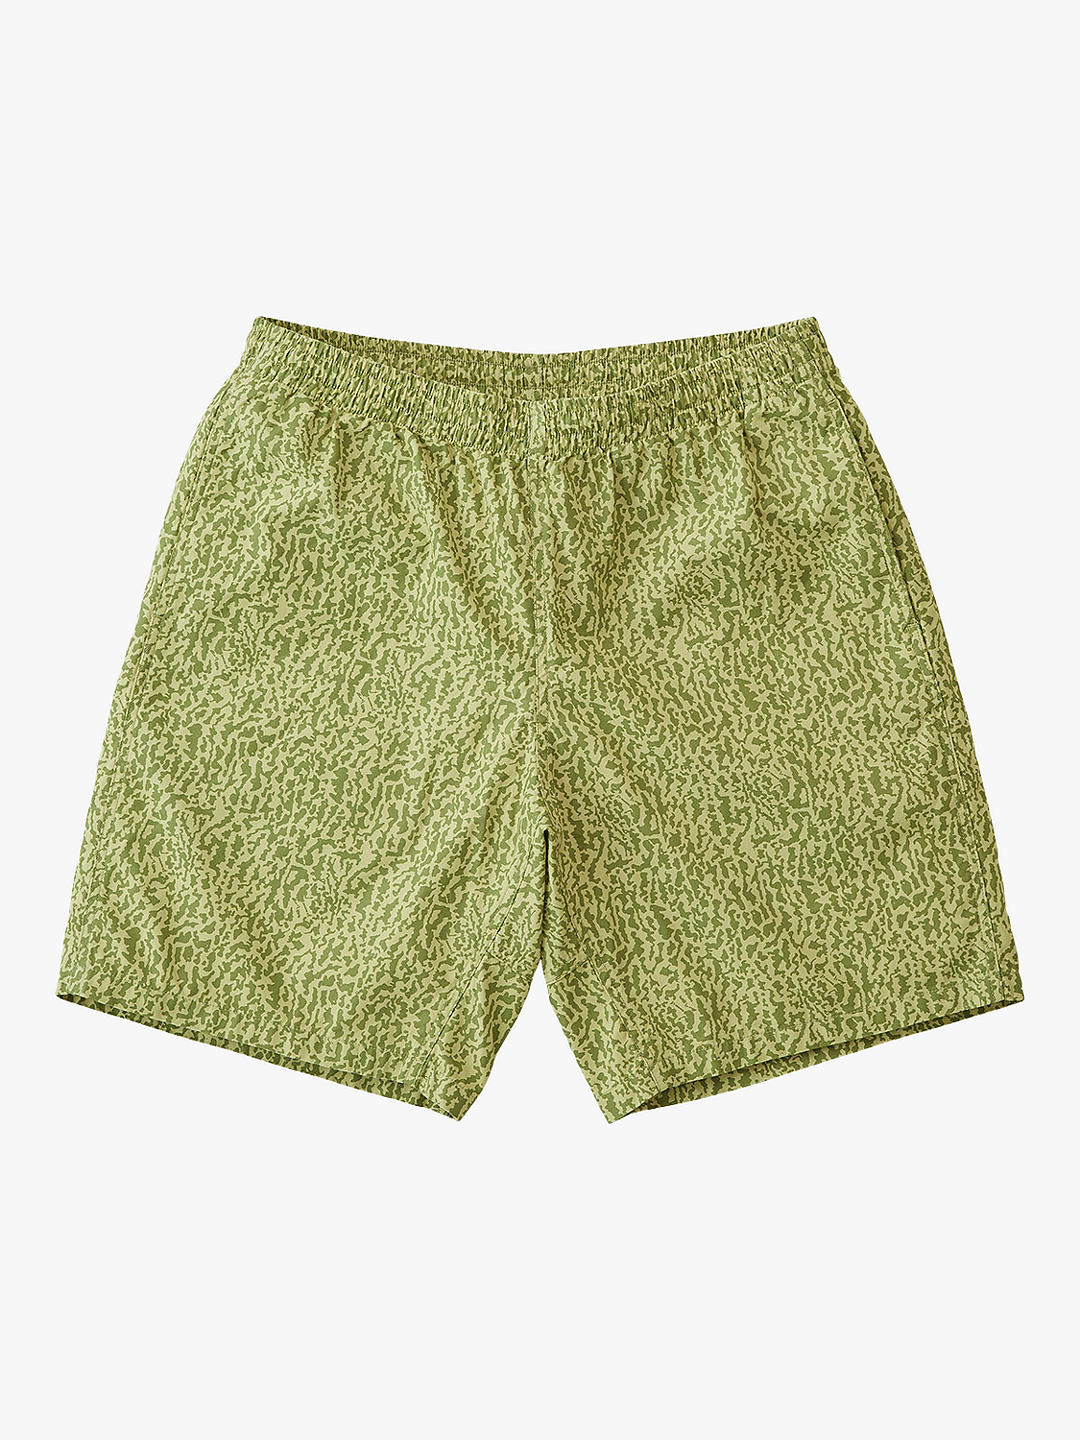 Gramicci Swell Patterned Shorts, Micro Bark